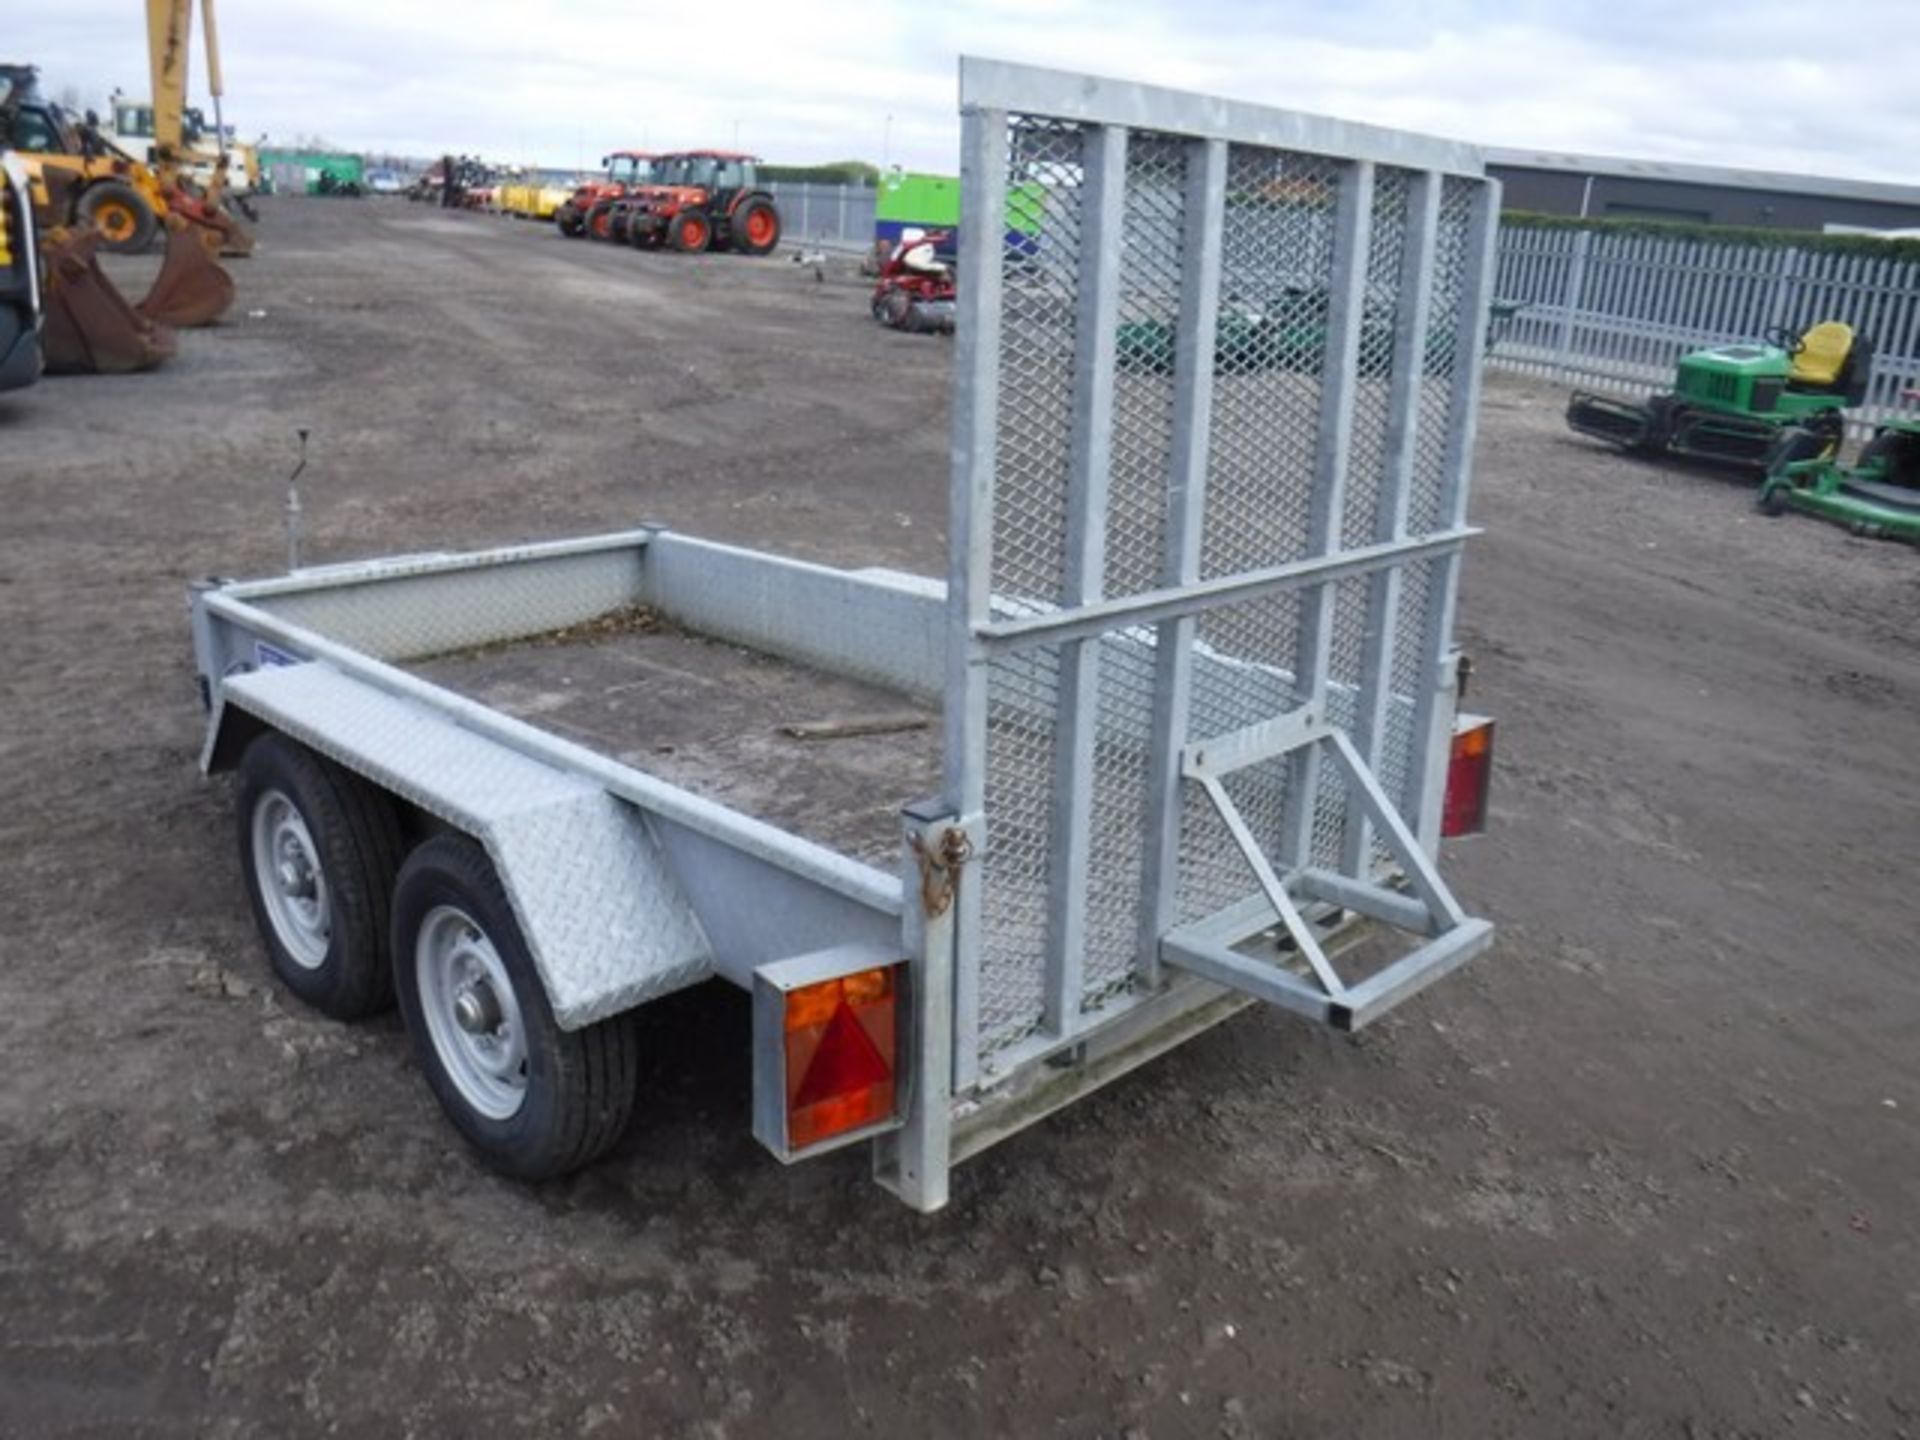 INDESPENSION 8x4 twin axle plant trailer with mesh ramp. ID 071497 - Image 2 of 3